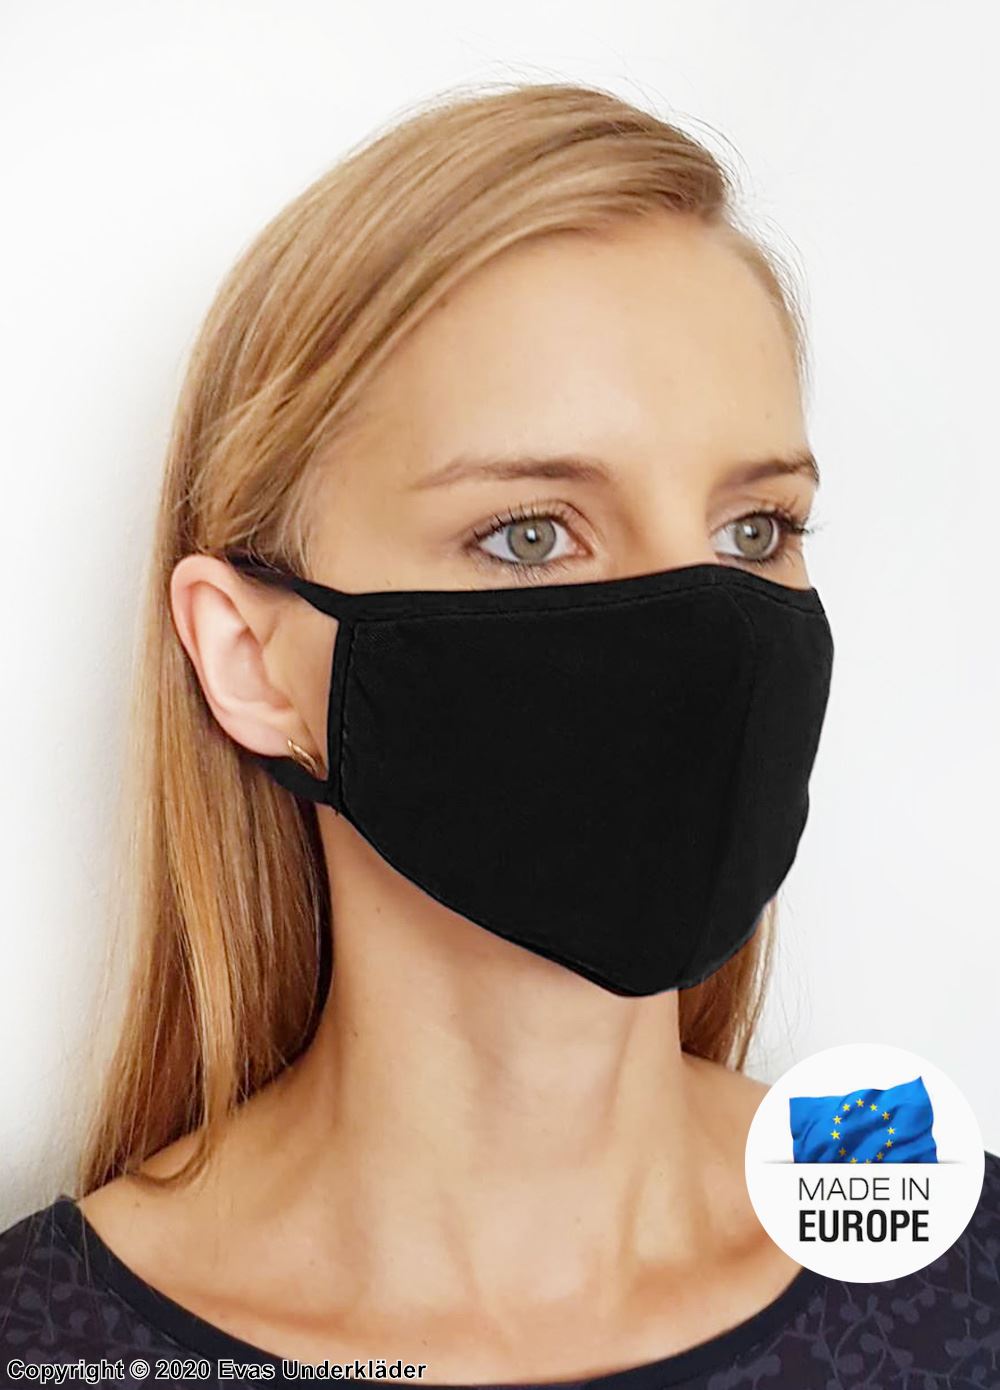 Face mask / mouth cover, single layer, black color, 4-pack